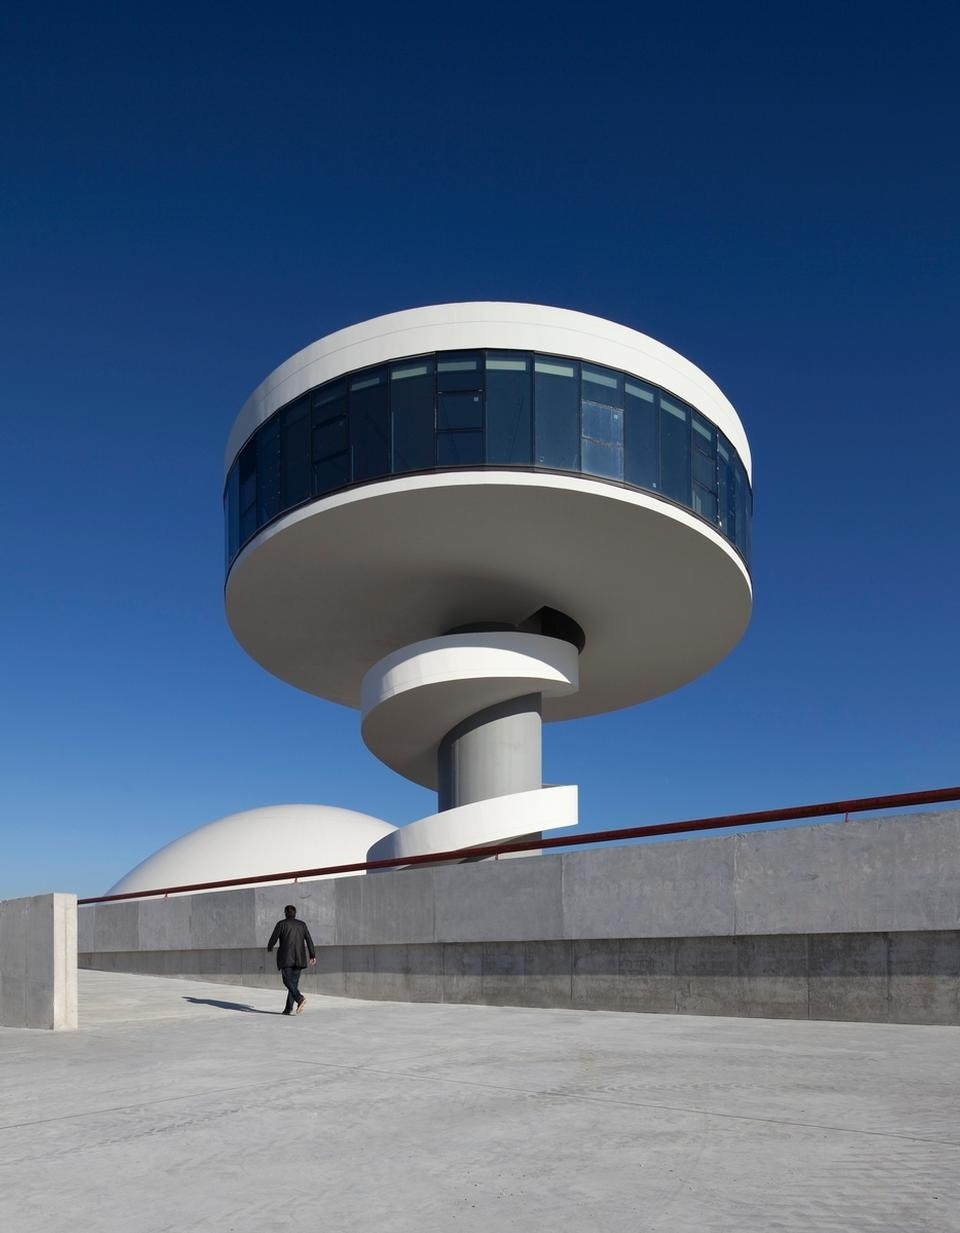 Inside the sight-seeing tower, panoramic views and a rotating schedule of star chefs add Gastronomy to the arts celebrated at Centro Niemeyer. Photo: © James Ewing Photography